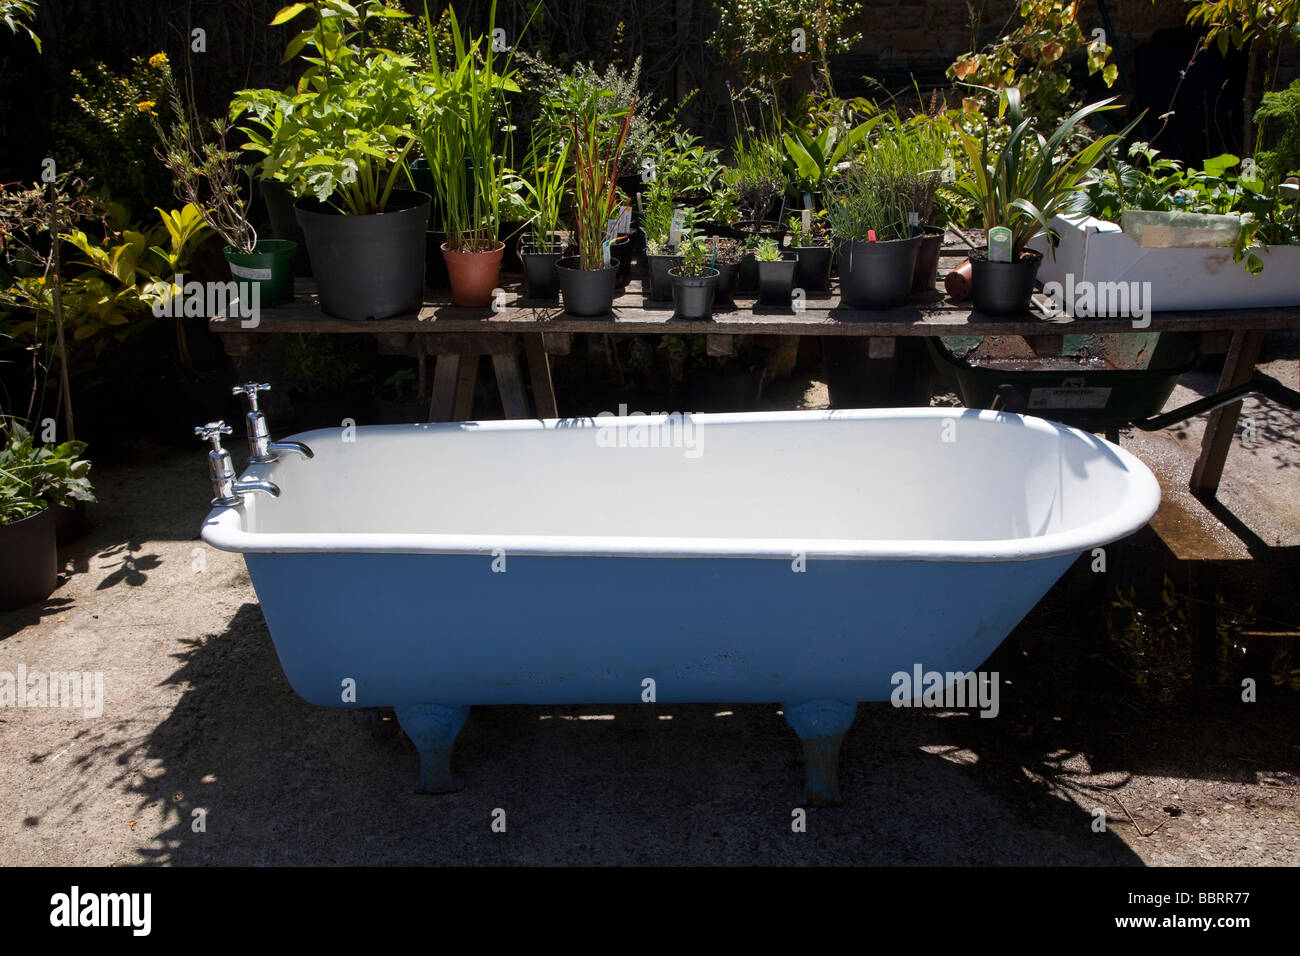 White cast iron bath tub sitting in the middle of a garden centre display Stock Photo